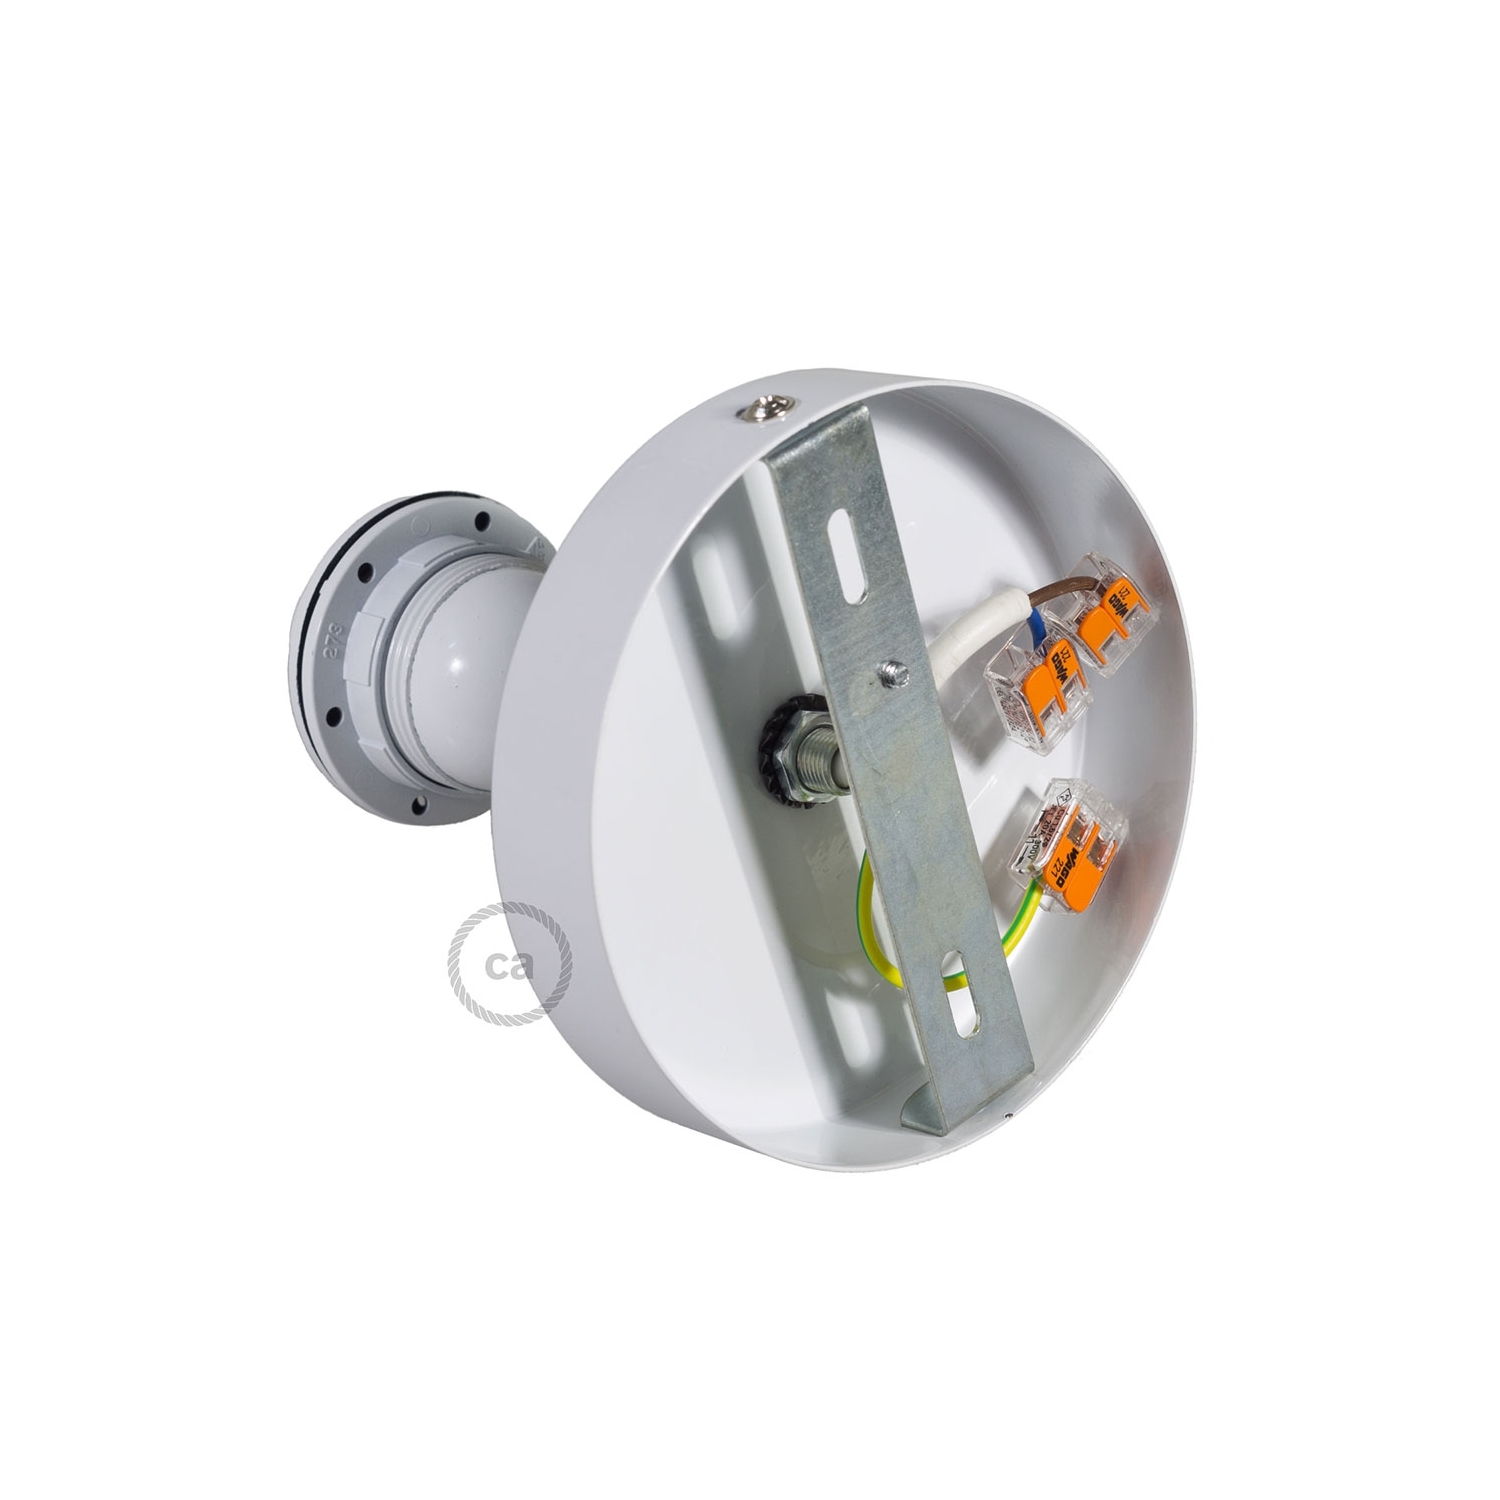 Fermaluce Metallo 90° White adjustable, with E26 threaded lamp holder, the metal wall or ceiling light source